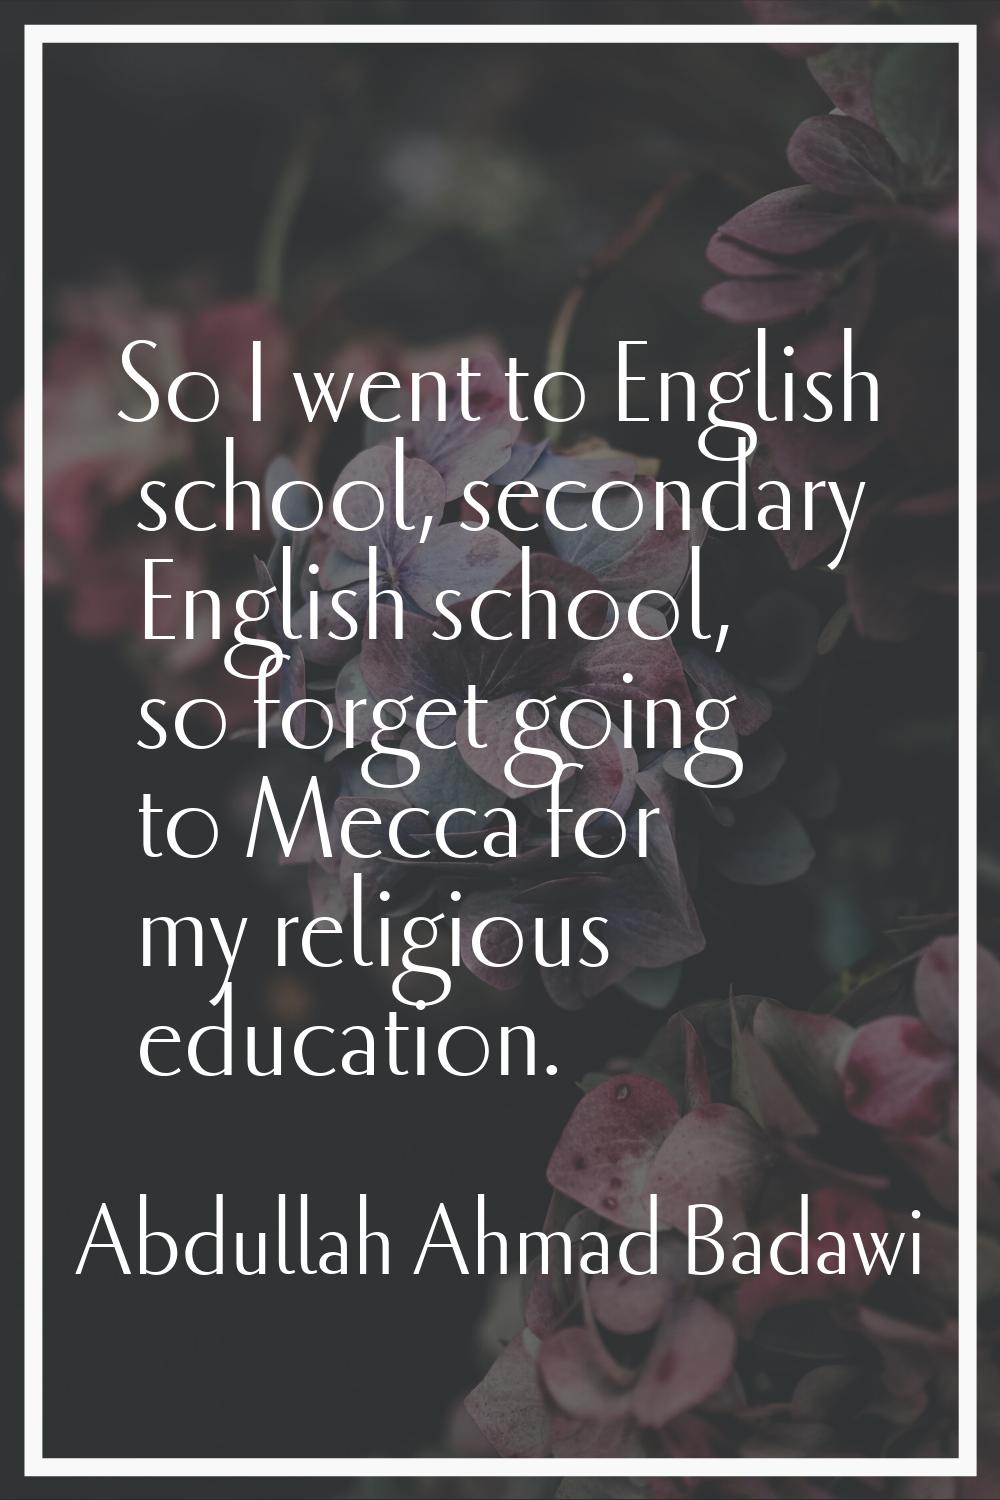 So I went to English school, secondary English school, so forget going to Mecca for my religious ed